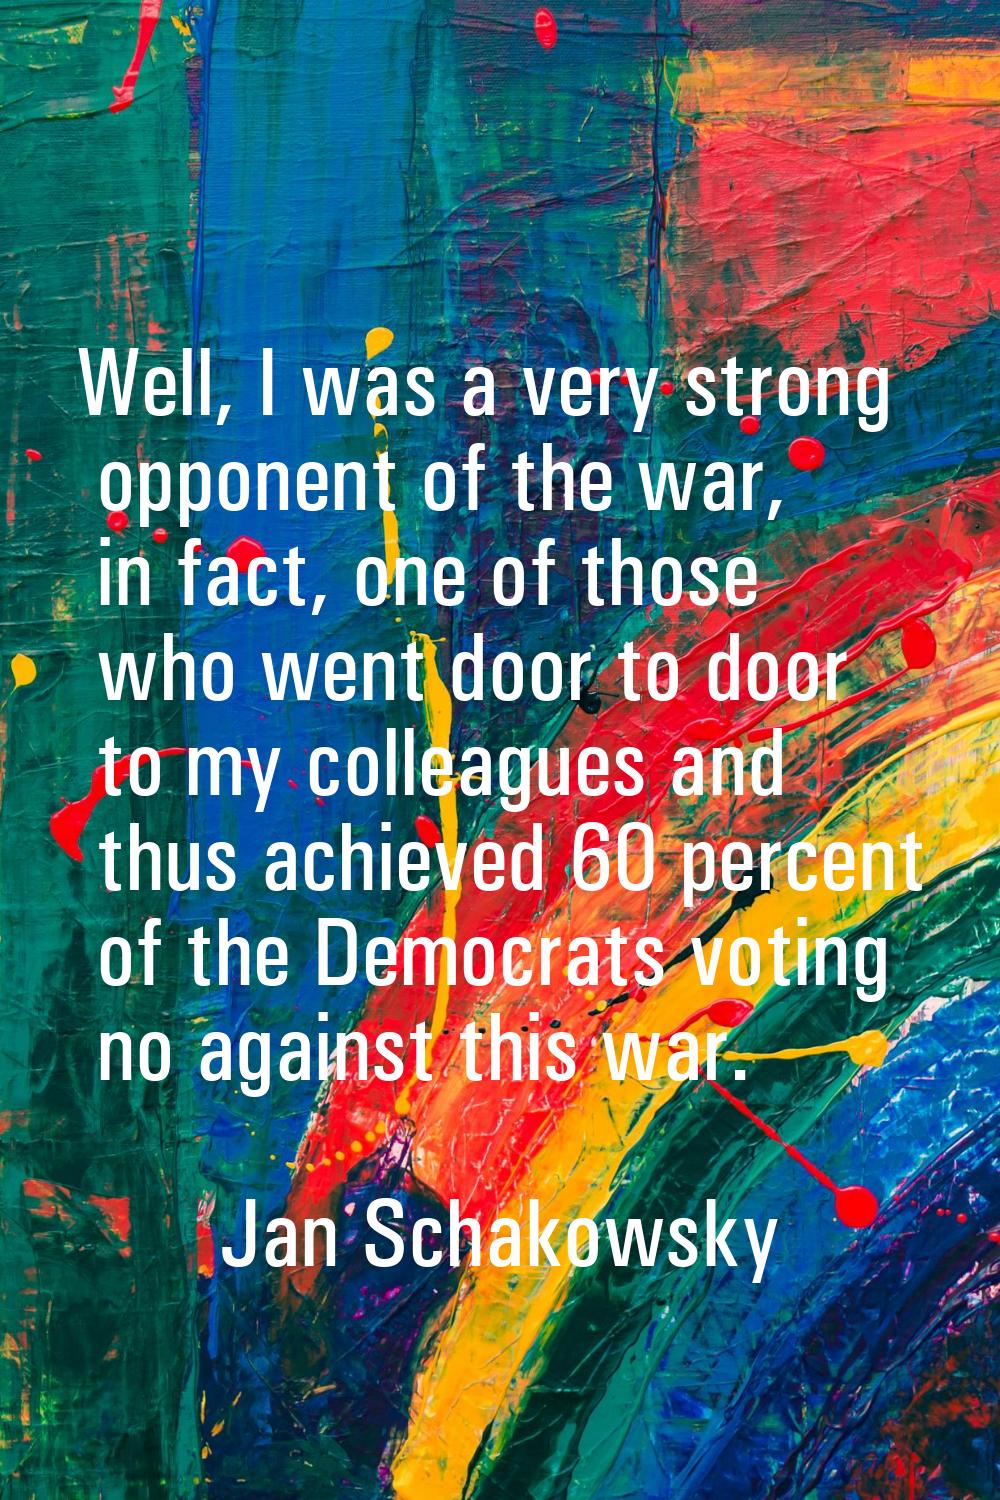 Well, I was a very strong opponent of the war, in fact, one of those who went door to door to my co